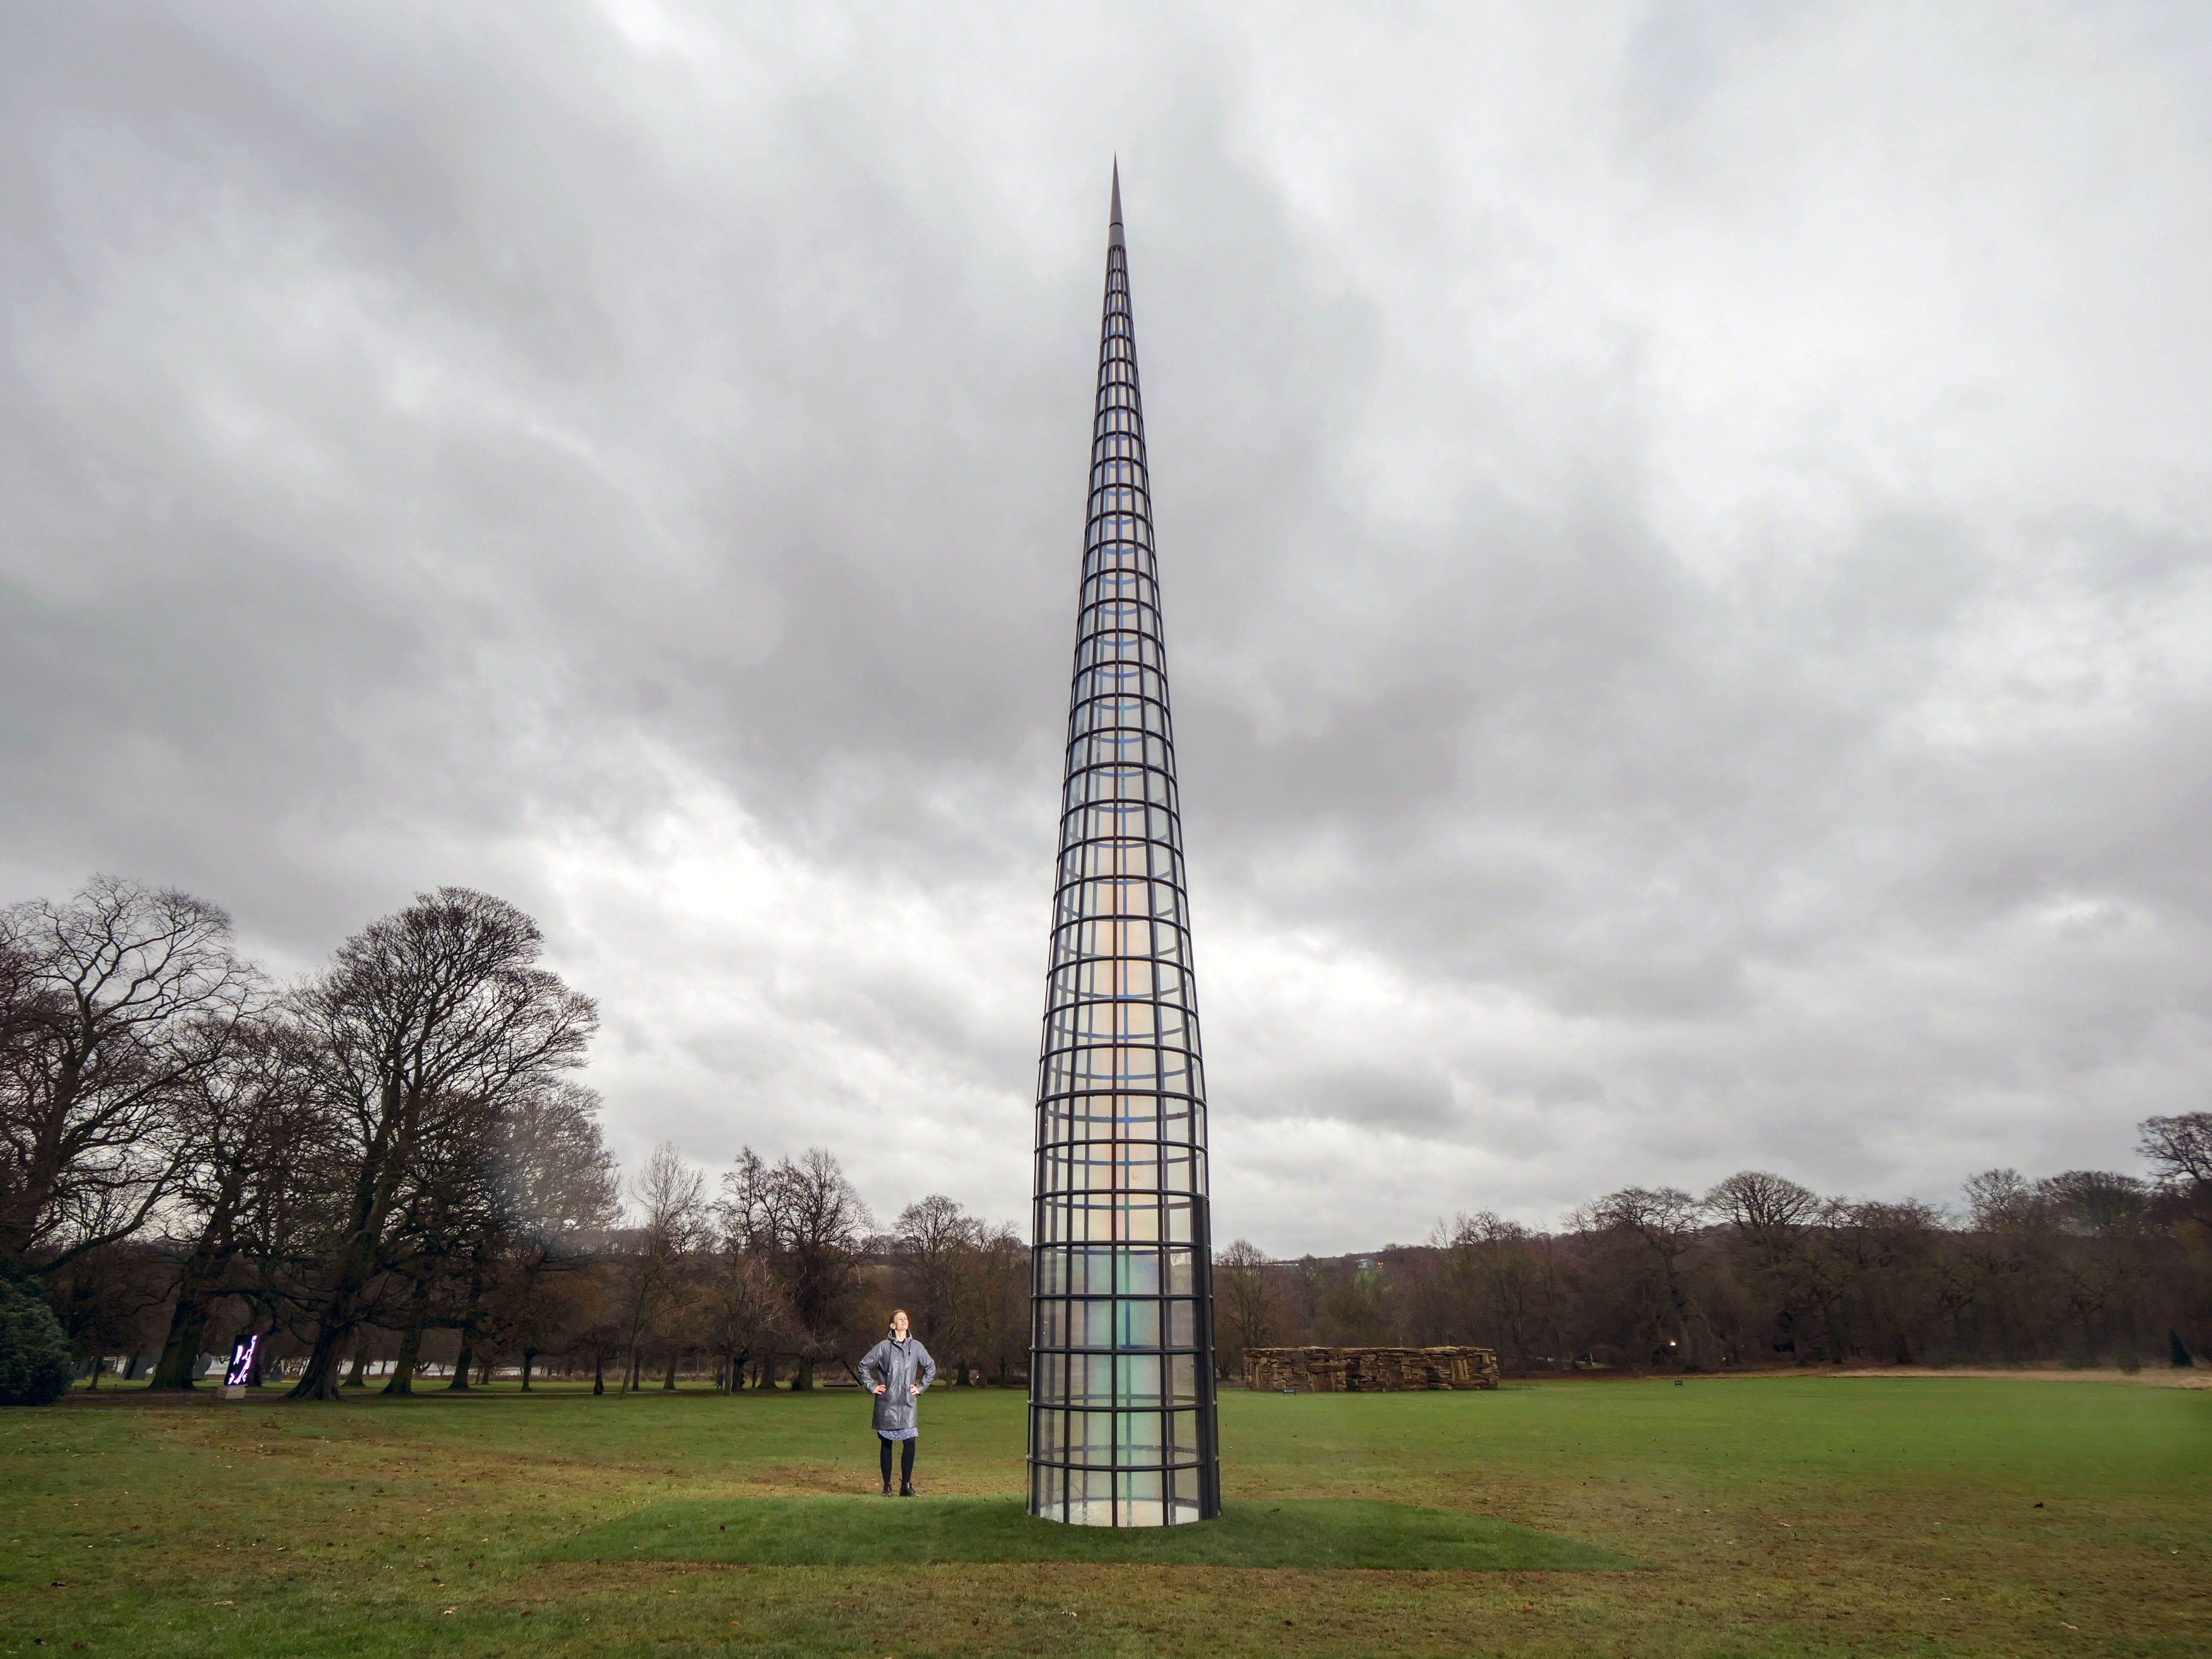 A person walking towards a tall pointed tower, with glass panels